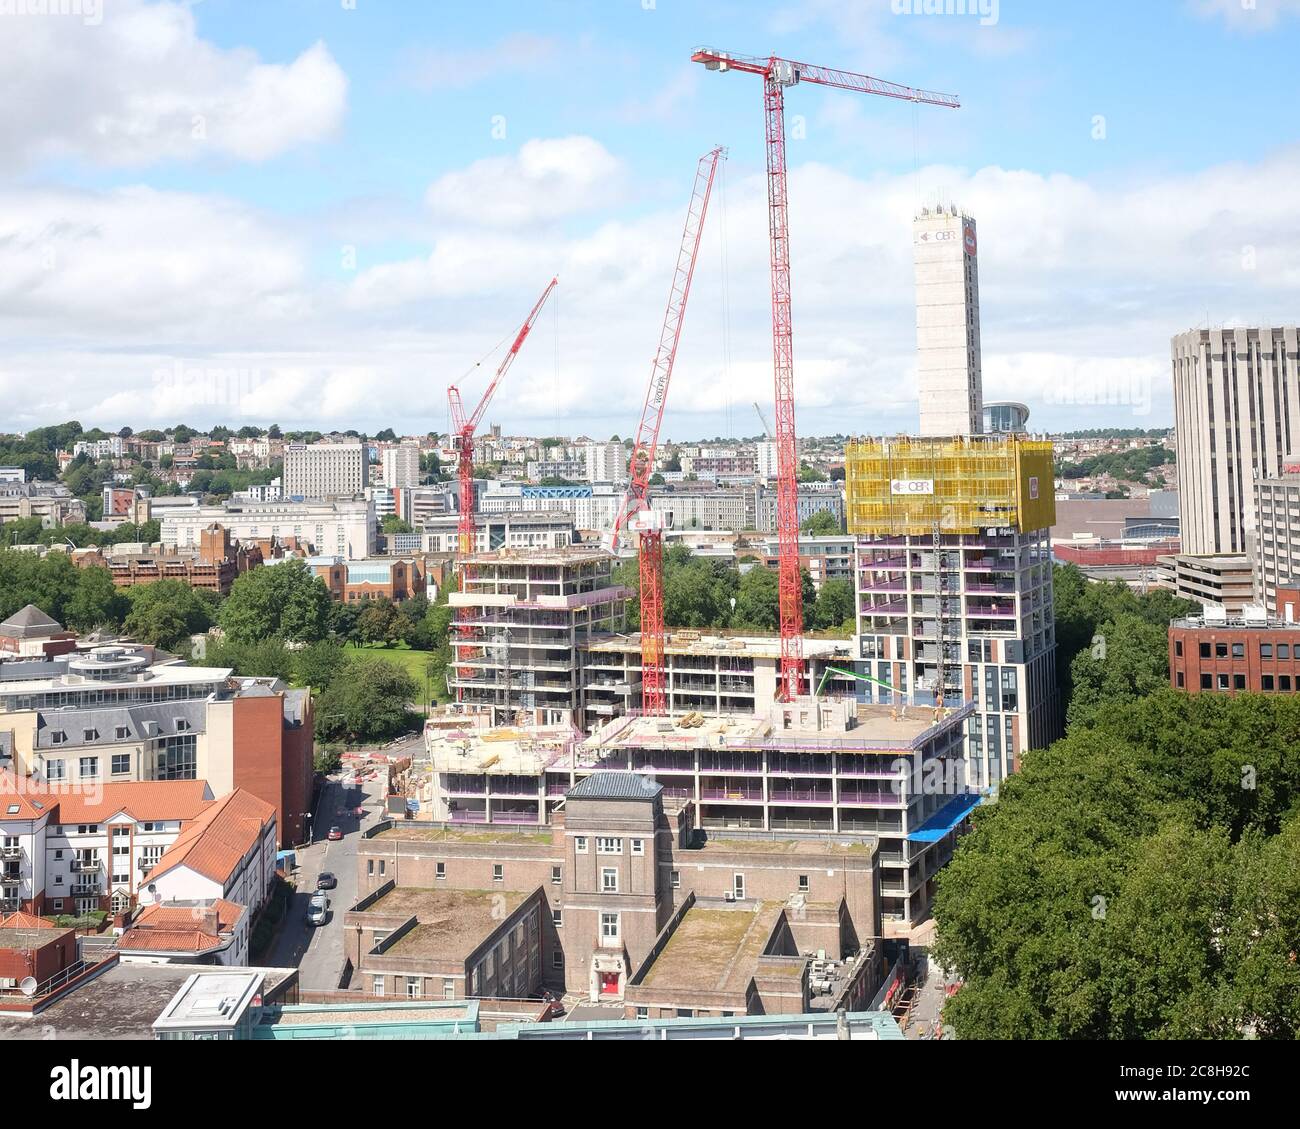 July 2020 - New residential construction in Bristol, the premier city in SW England. Stock Photo